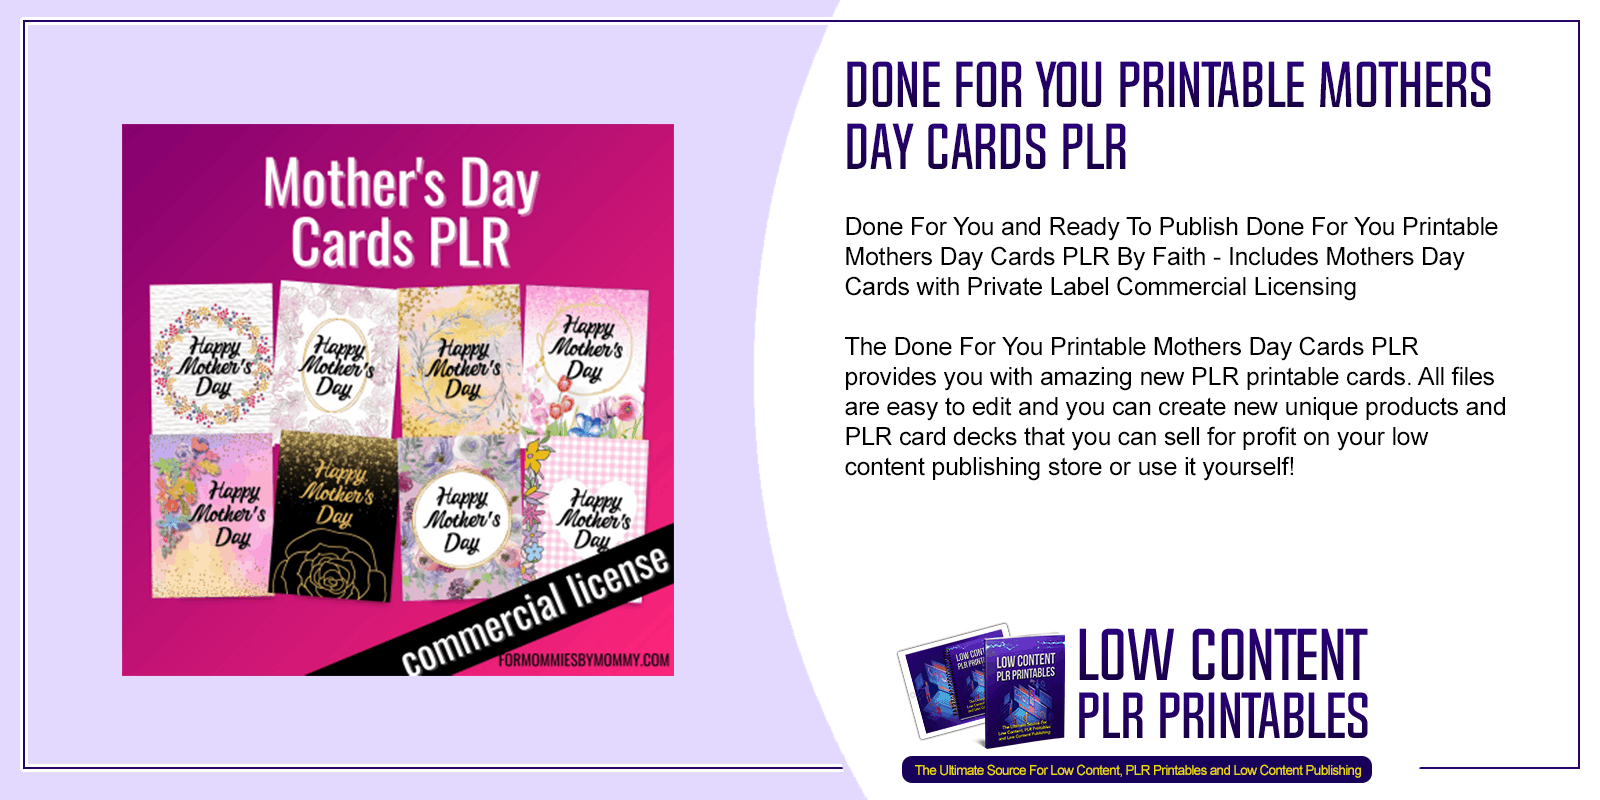 Done For You Printable Mothers Day Cards PLR